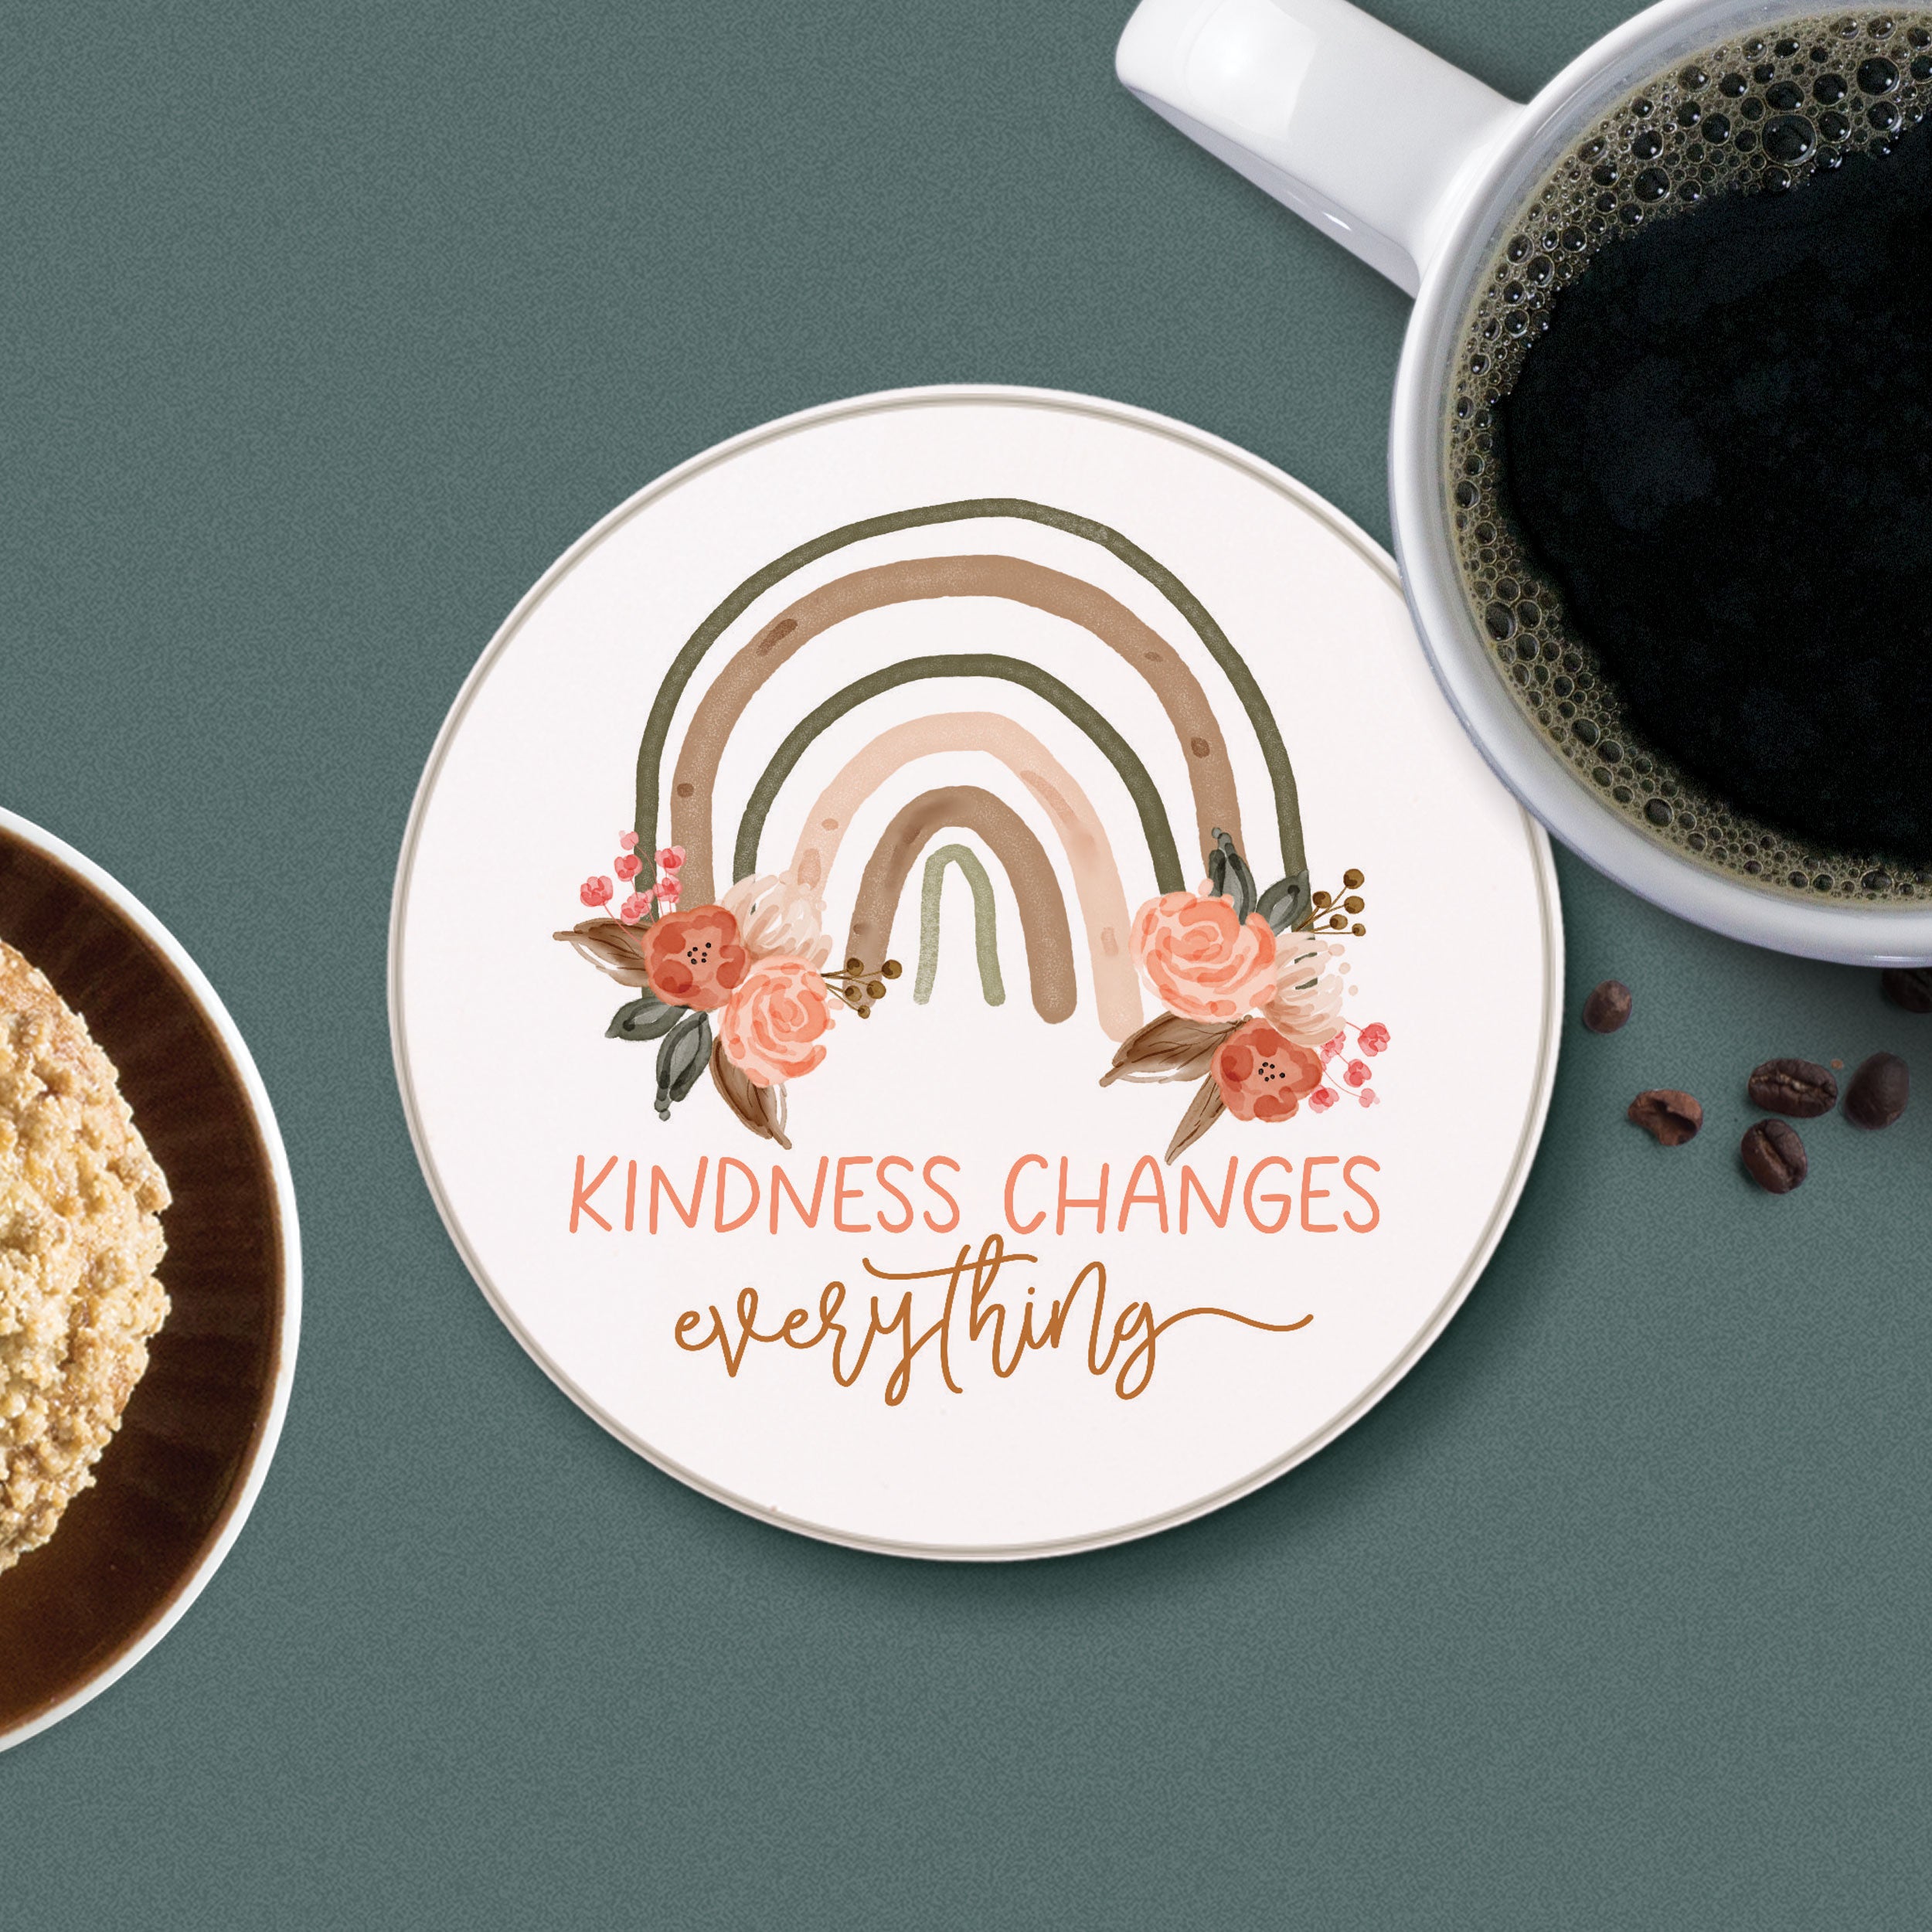 Kindness Changes Everything Round Coaster